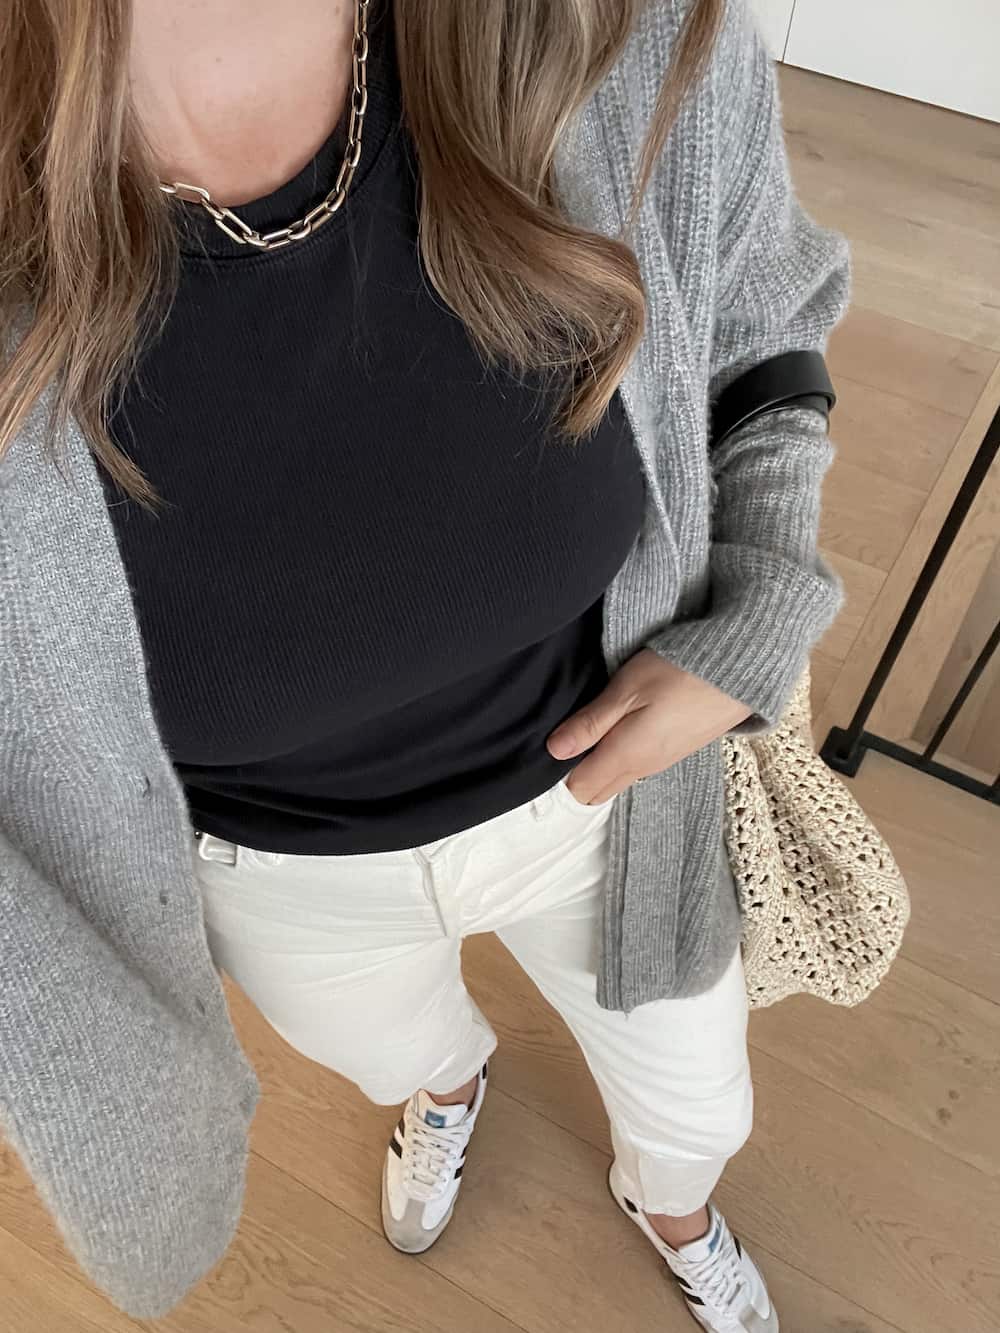 woman wearing a spring capsule wardrobe outfit with a grey knit cardigan, black top, off-white jeans, and white sneakers